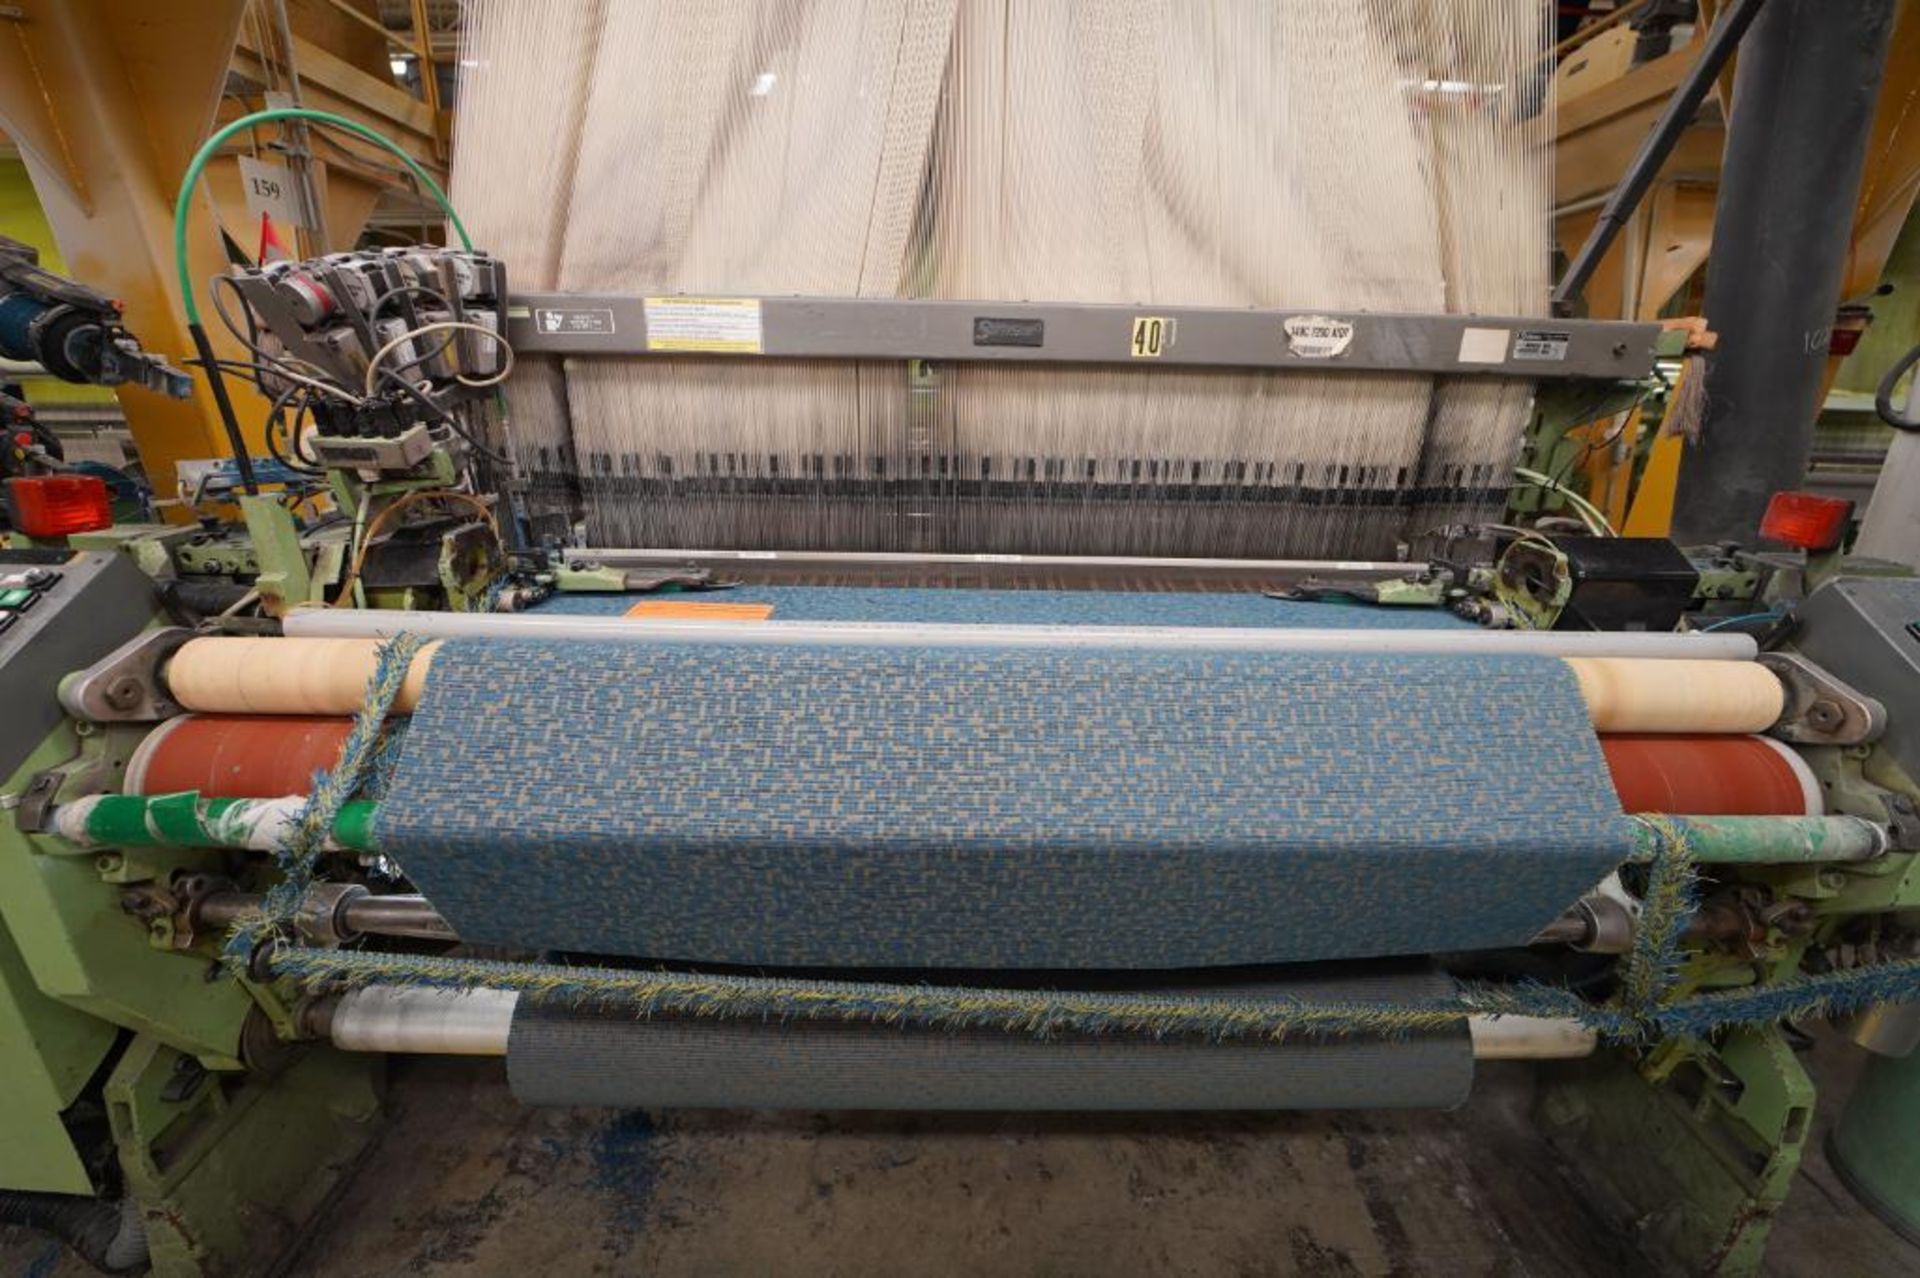 1998 Dornier 200 cm Jacquard Rapier Loom, Model HTVS 8/S, S/N 40736 - Equiped with 6 ECS, Located At - Image 6 of 11